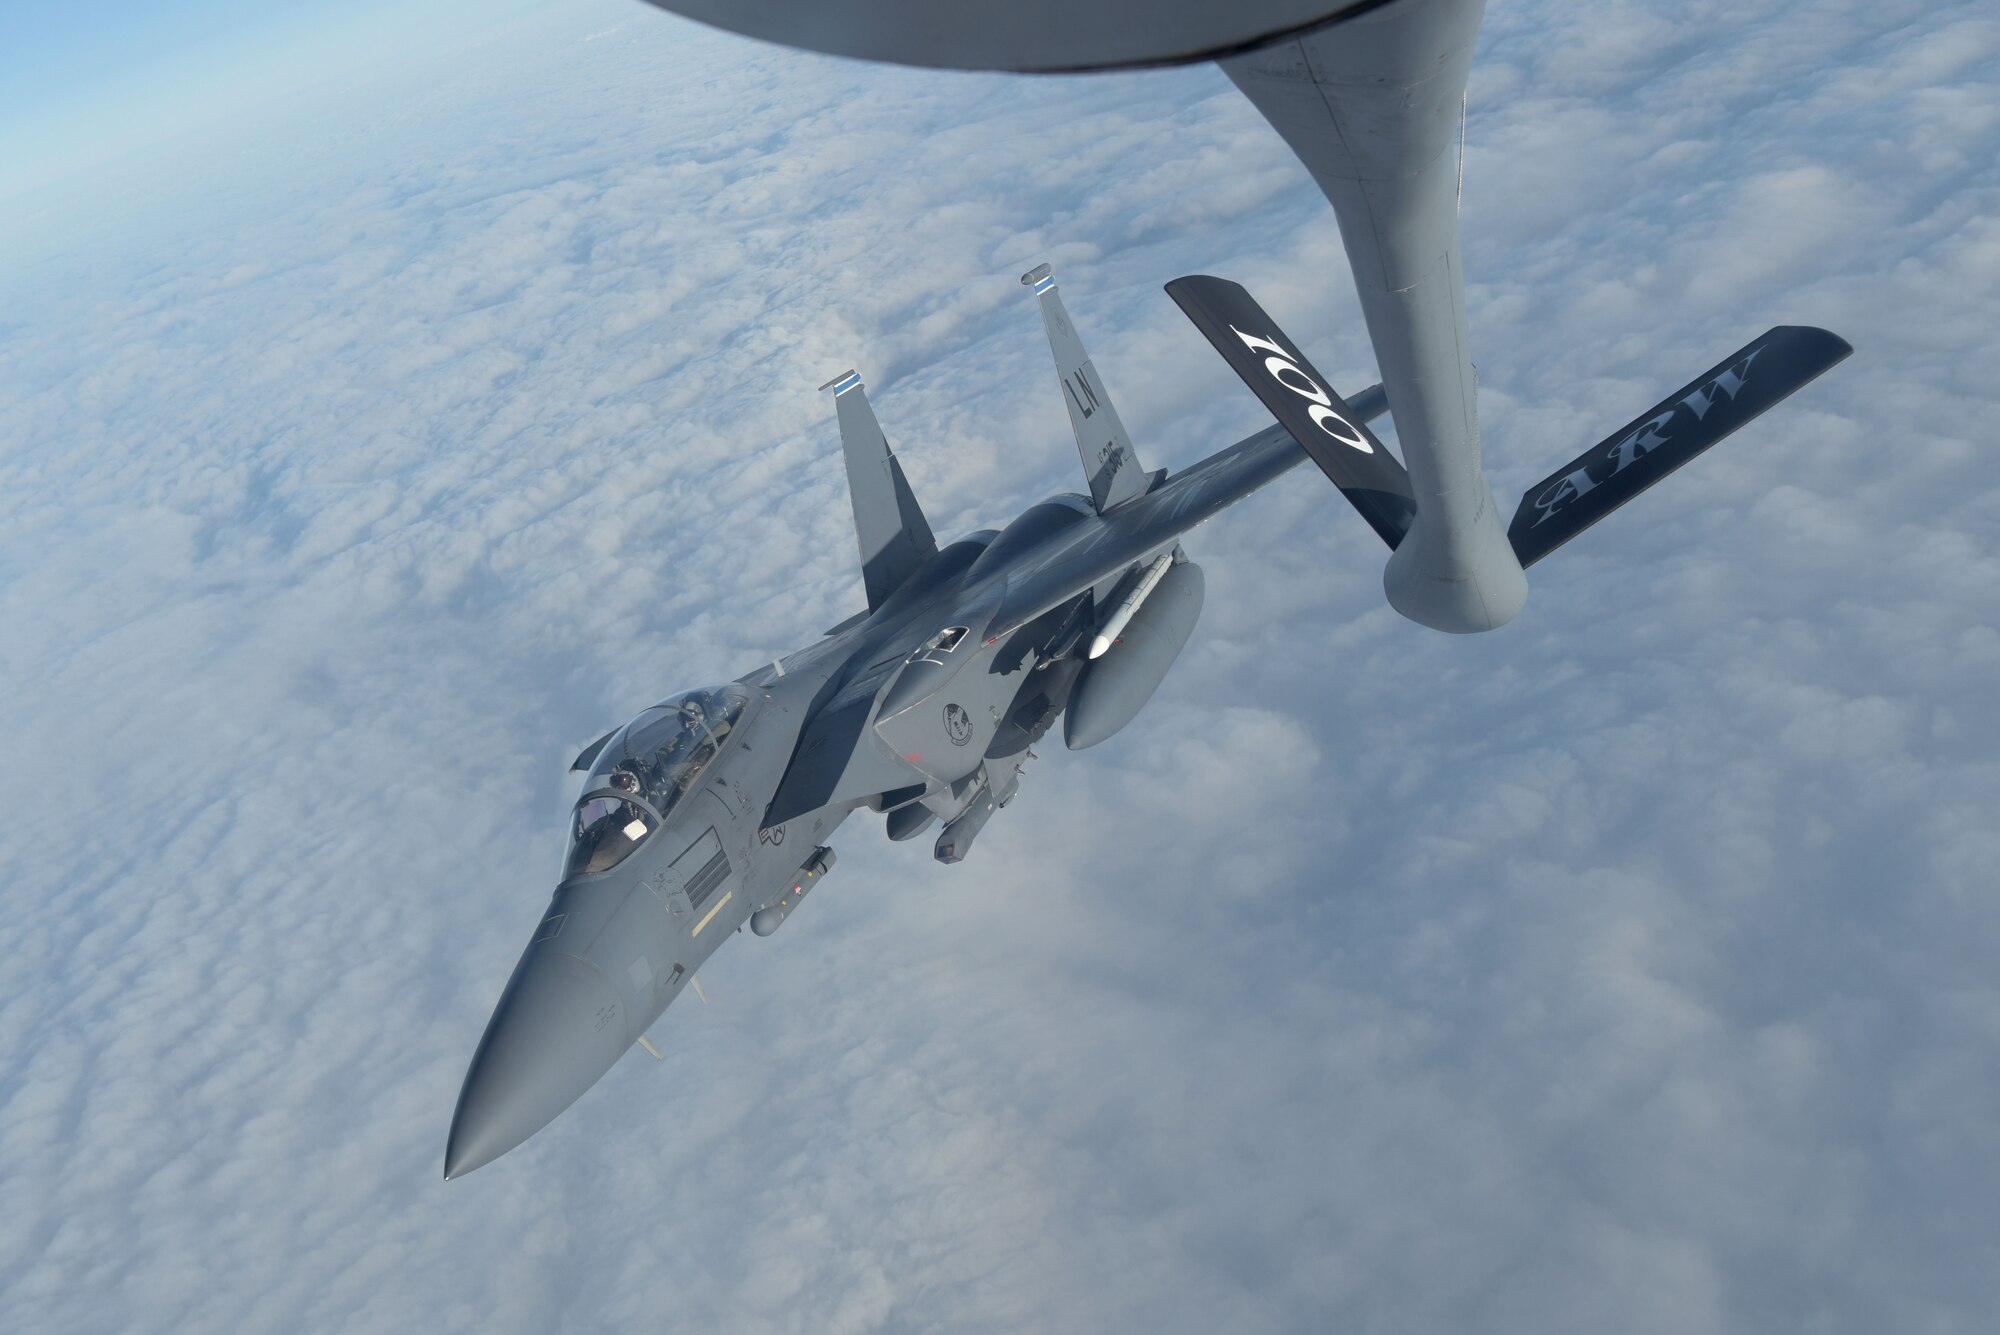 A U.S. Air Force F-15E Strike Eagle assigned to the 492nd Fighter Squadron, RAF Lakenheath, England, peels away after receiving fuel from a 100th Air Refueling Wing KC-135 Stratotanker during the Allied Combat Lethality Exercise over Poland, Dec. 10, 2019. Participation in multinational exercises enhance professional relationships and improves overall coordination with allies and partner militaries during times of crisis. (U.S. Air Force photo by Senior Airman Benjamin Cooper)